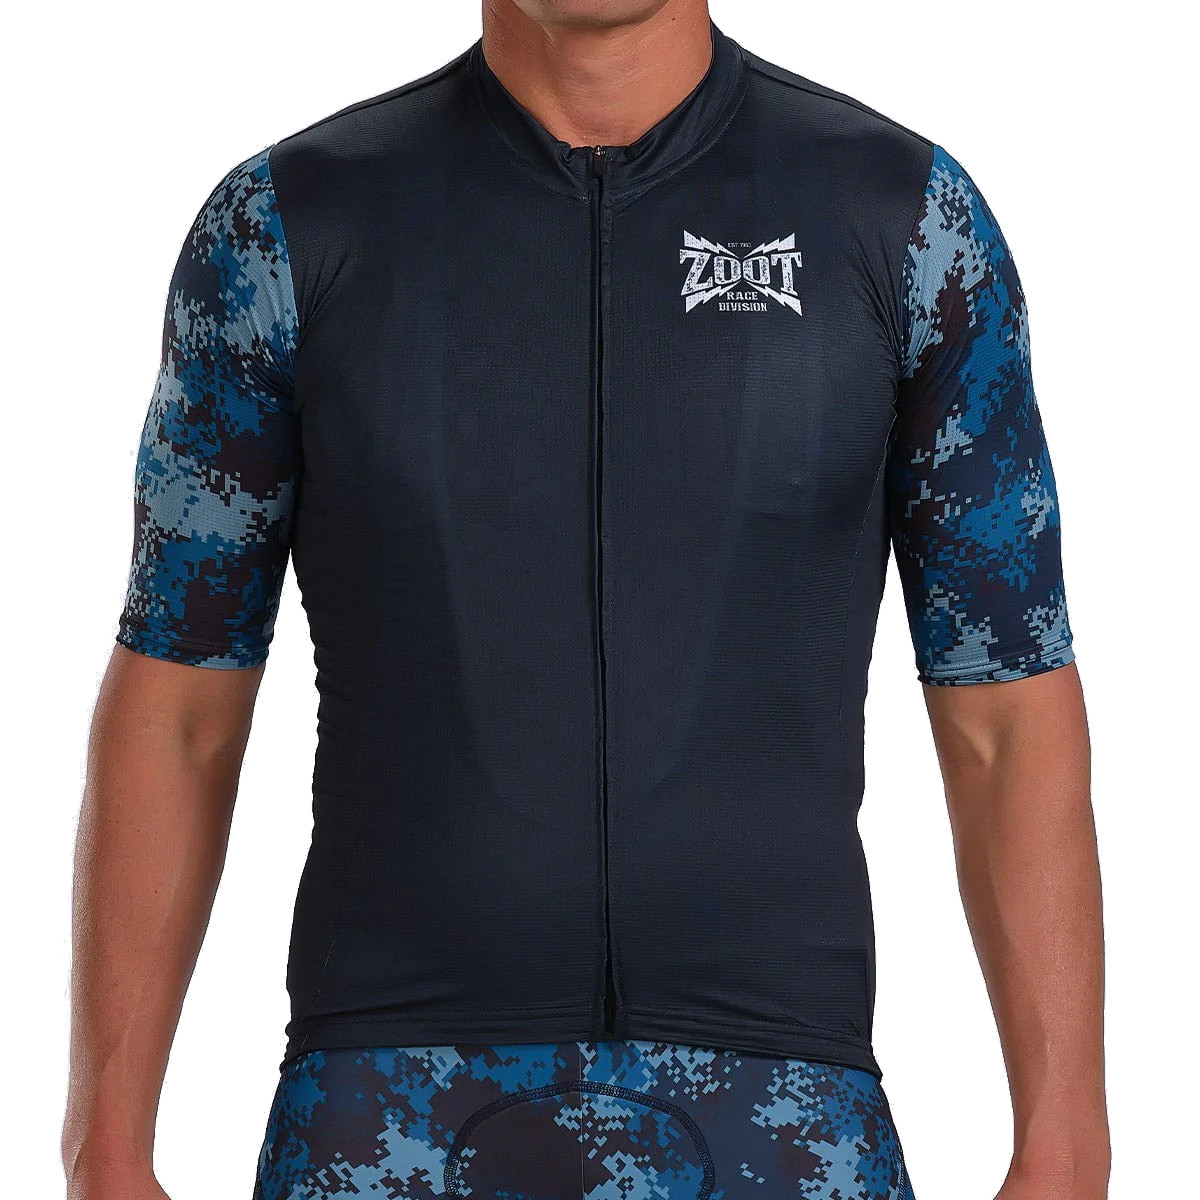 Image of ZOOT Men's LTD Cycle Aero Jersey - race division